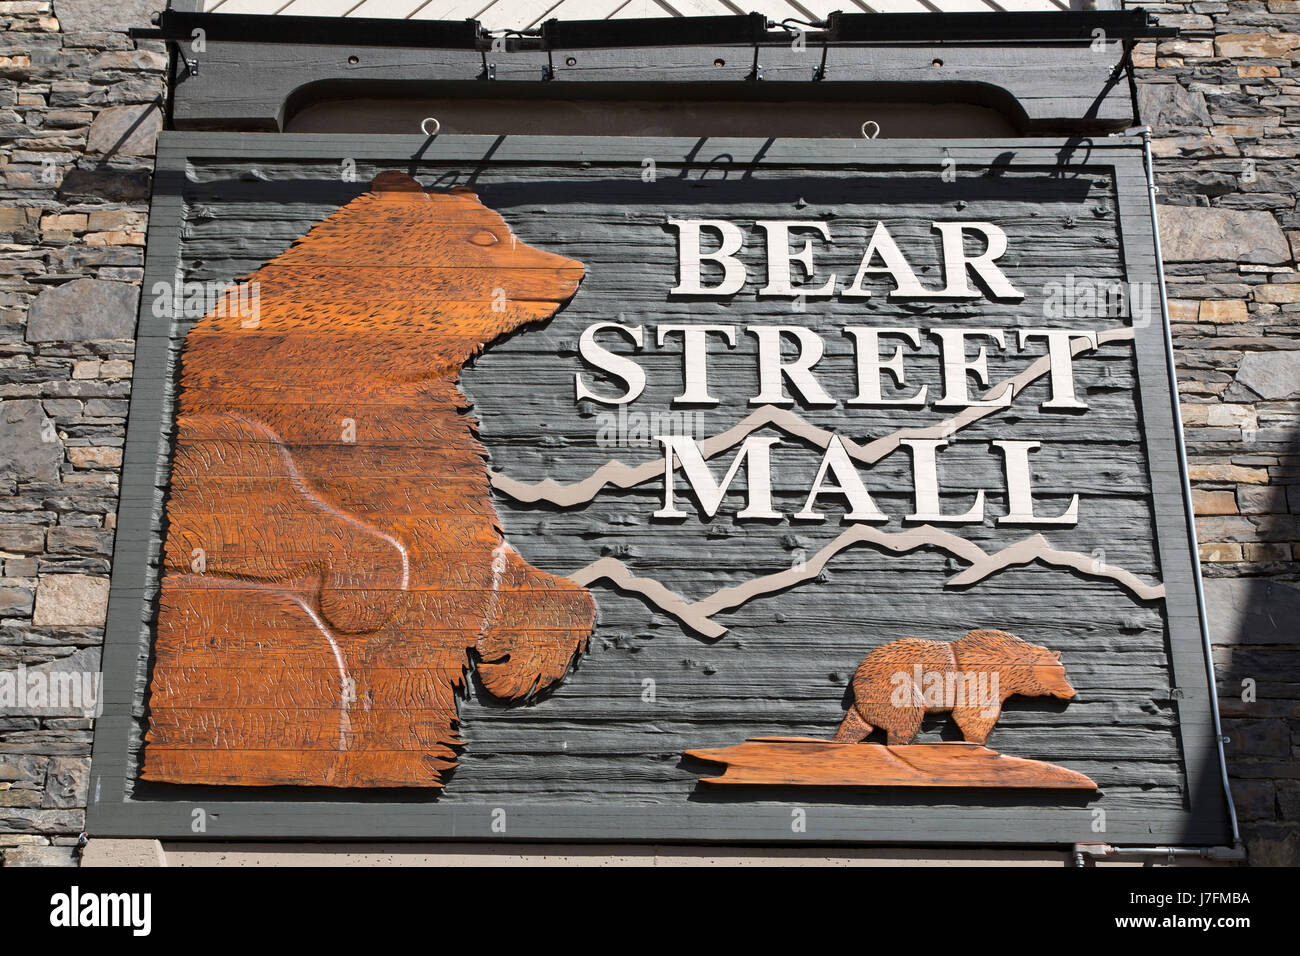 A sign for the Bear Street Mall in Banff, Alberta, Canada. It is one of several shopping centres in the Canadian municipality. Stock Photo